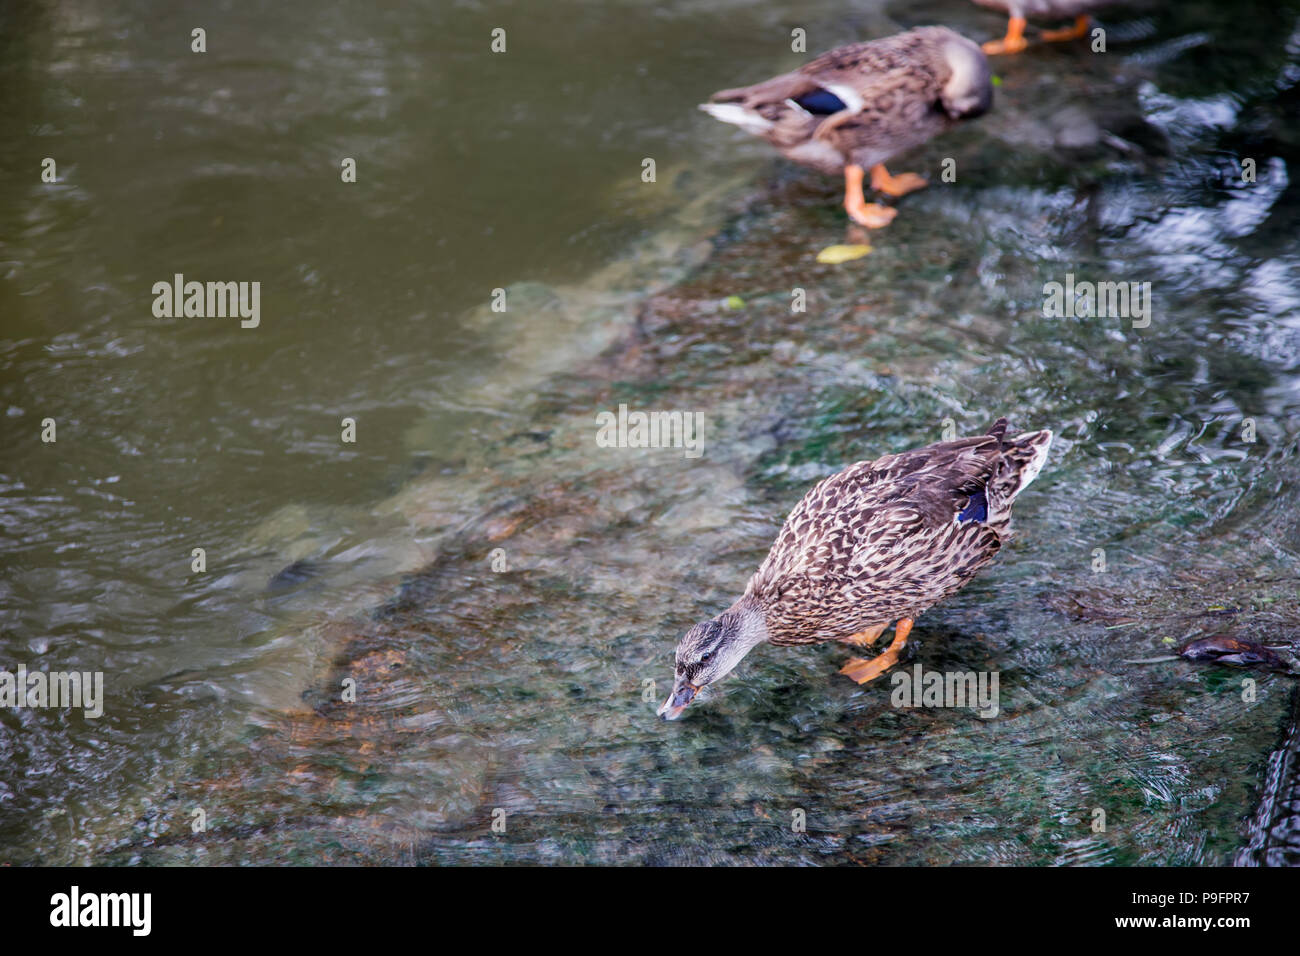 cute duck drinking and watching on waterfal. Beauty in nature concept Stock Photo